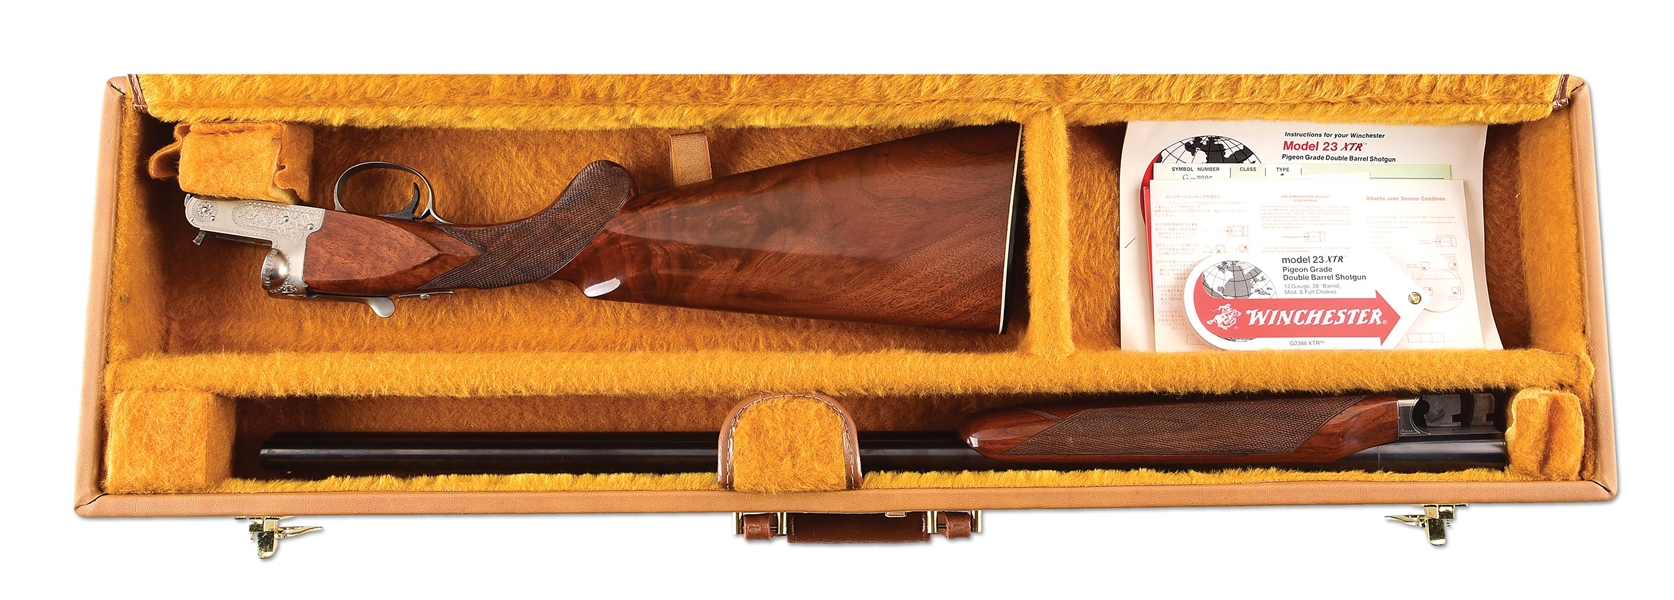 (M) WINCHESTER MODEL 23 PIGEON SIDE BY SIDE SHOTGUN WITH CASE AND BOX.